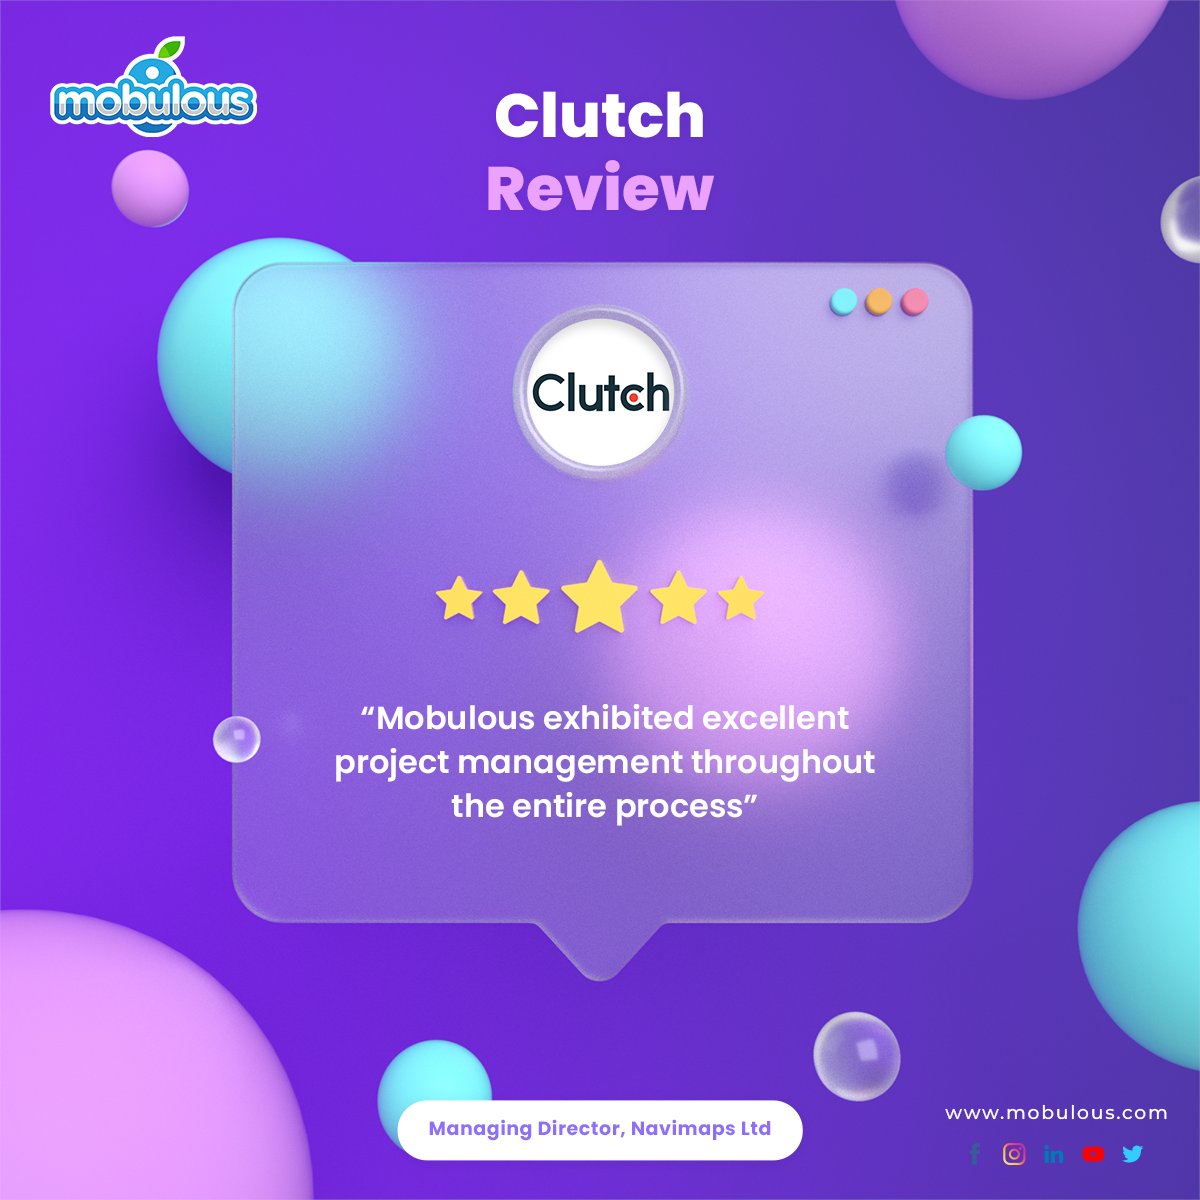 🌟It's Monday, and we're kicking off the week with some fantastic news! Mobulous just received an amazing review on #Clutch! 🎉 Our team is thrilled to share this achievement with you all. Thank you to our valued clients for their trust and support. 💪🚀#Mobulous #ClutchReview